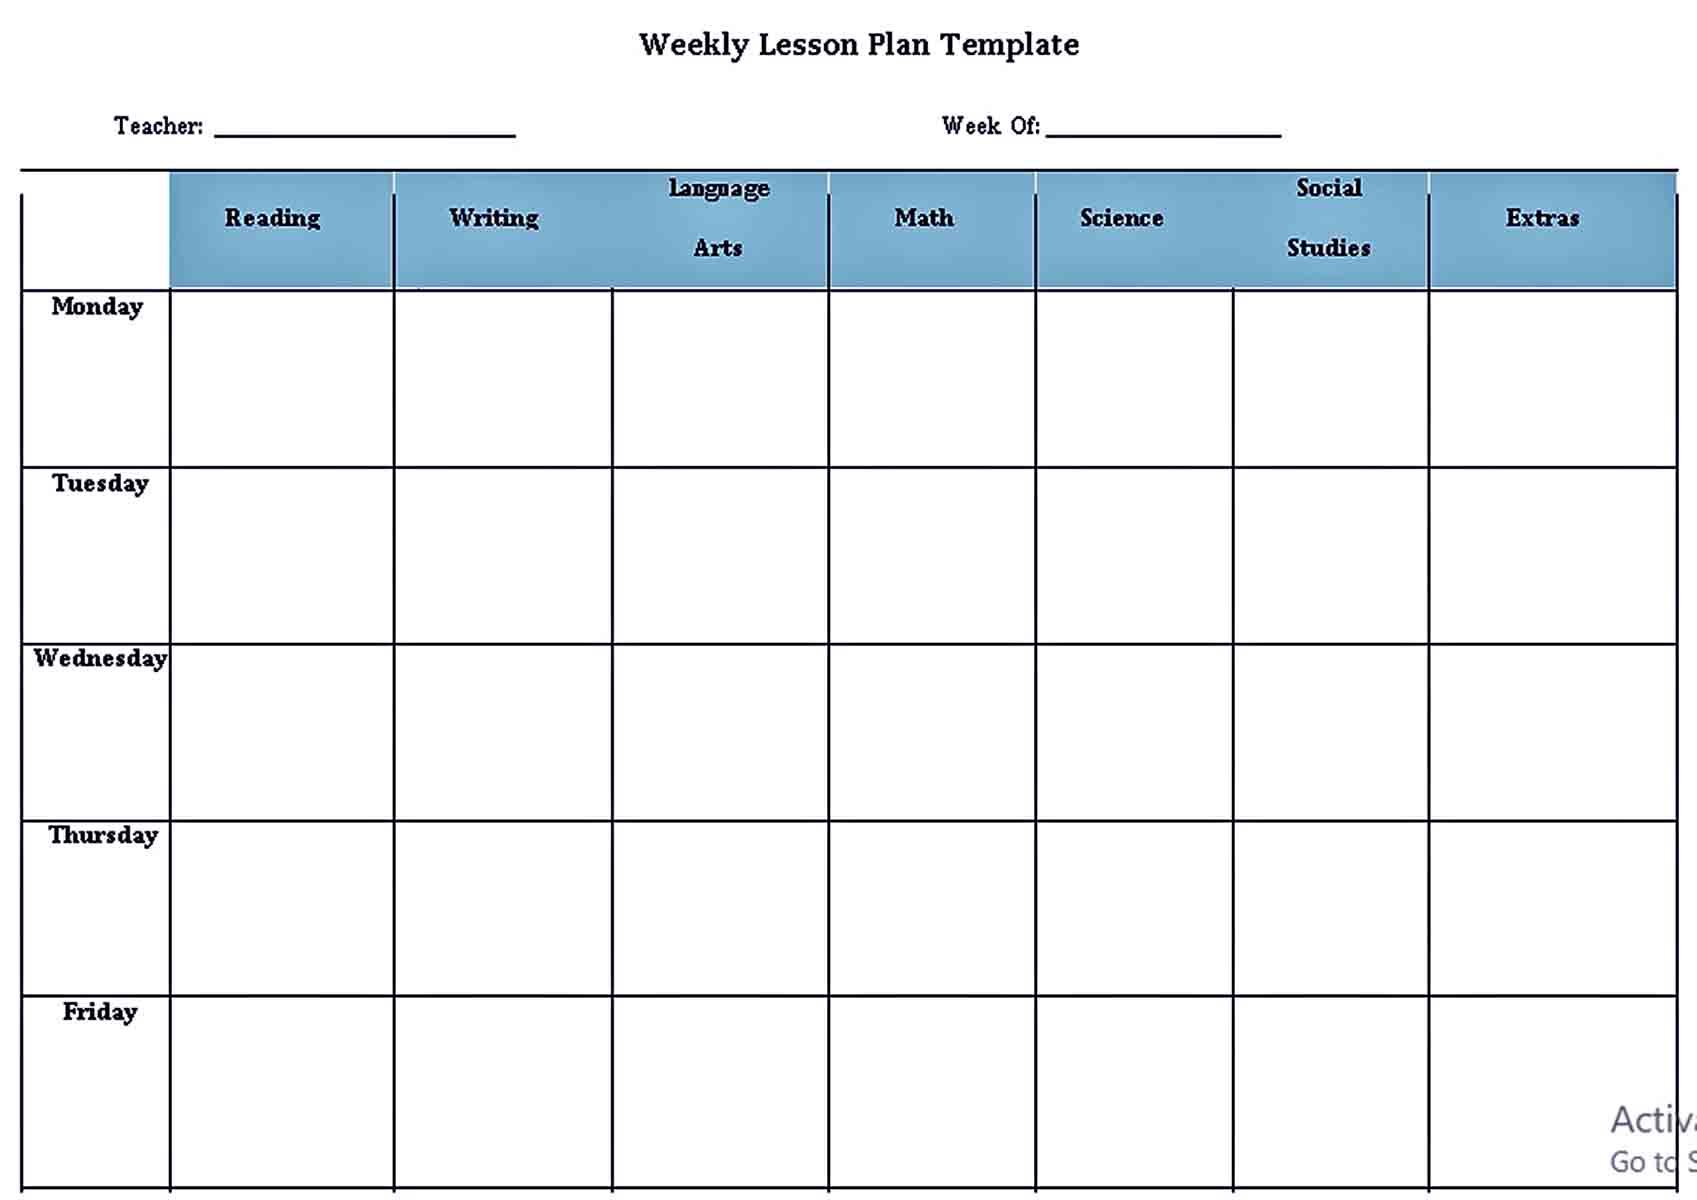 Blank Weekly Lesson Plan Template from uroomsurf.com